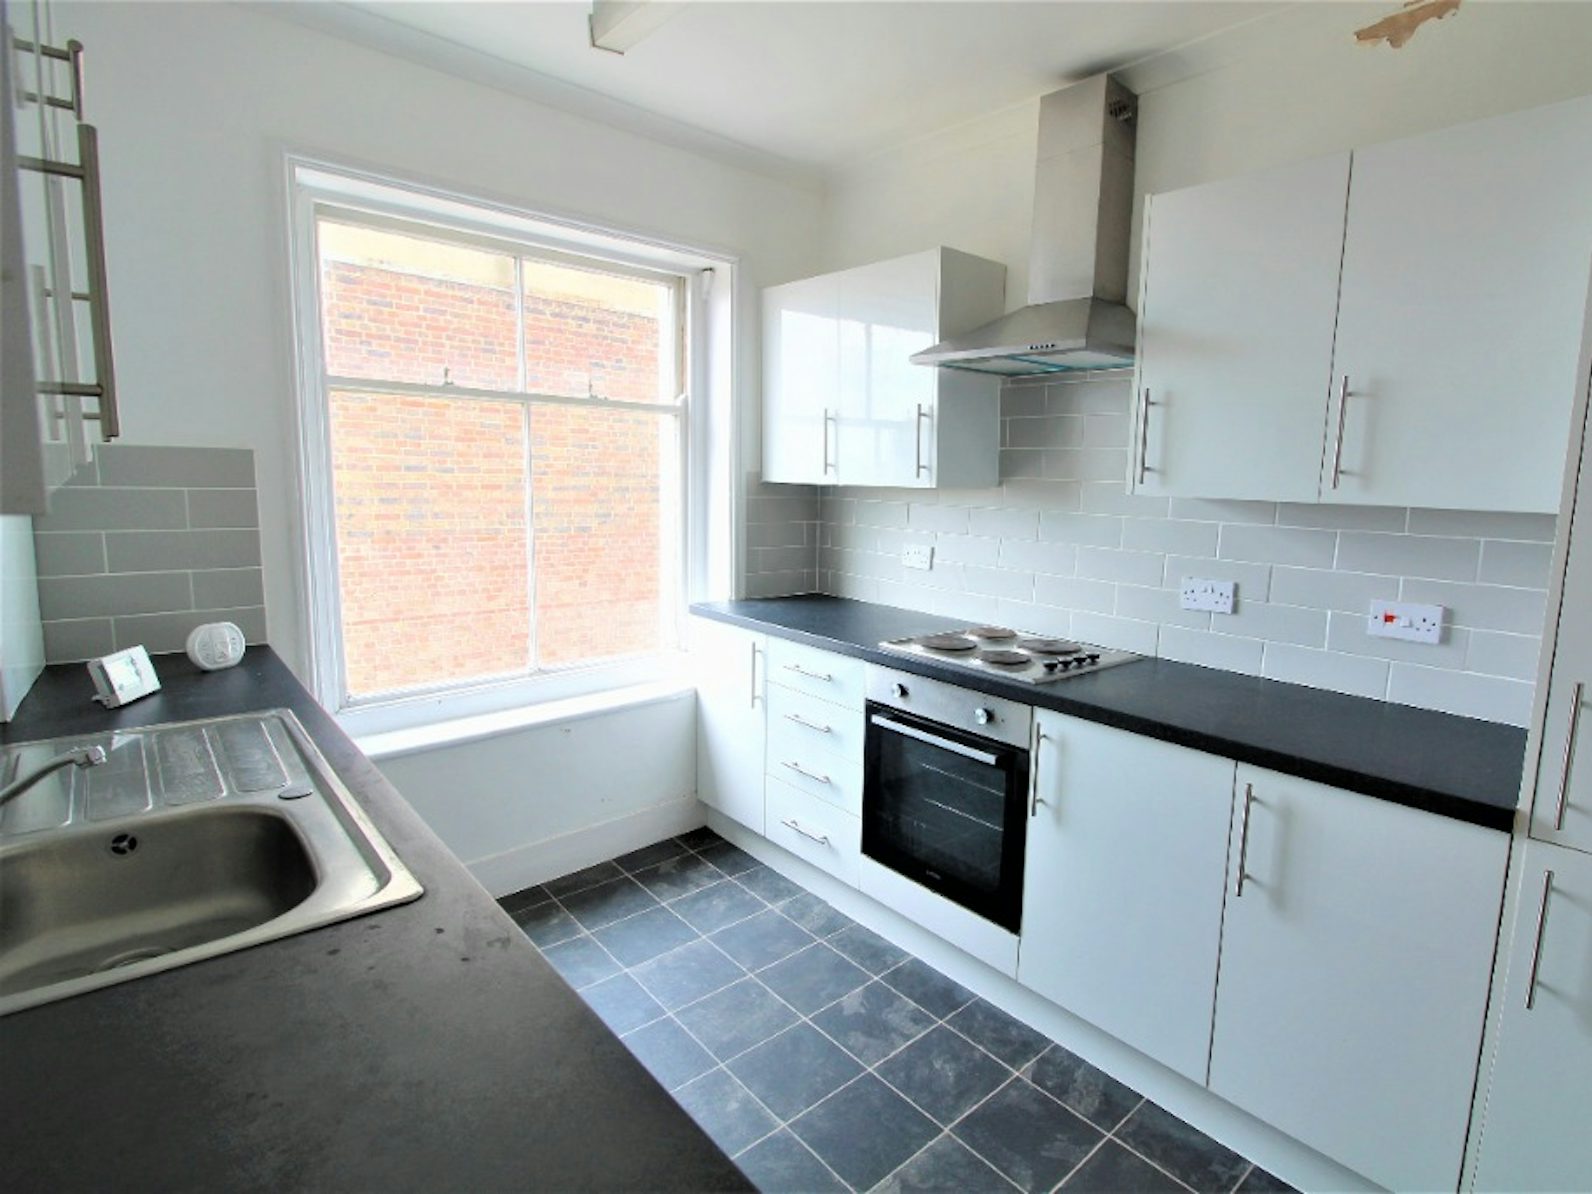 Flat to rent on Western Road Hove, BN3